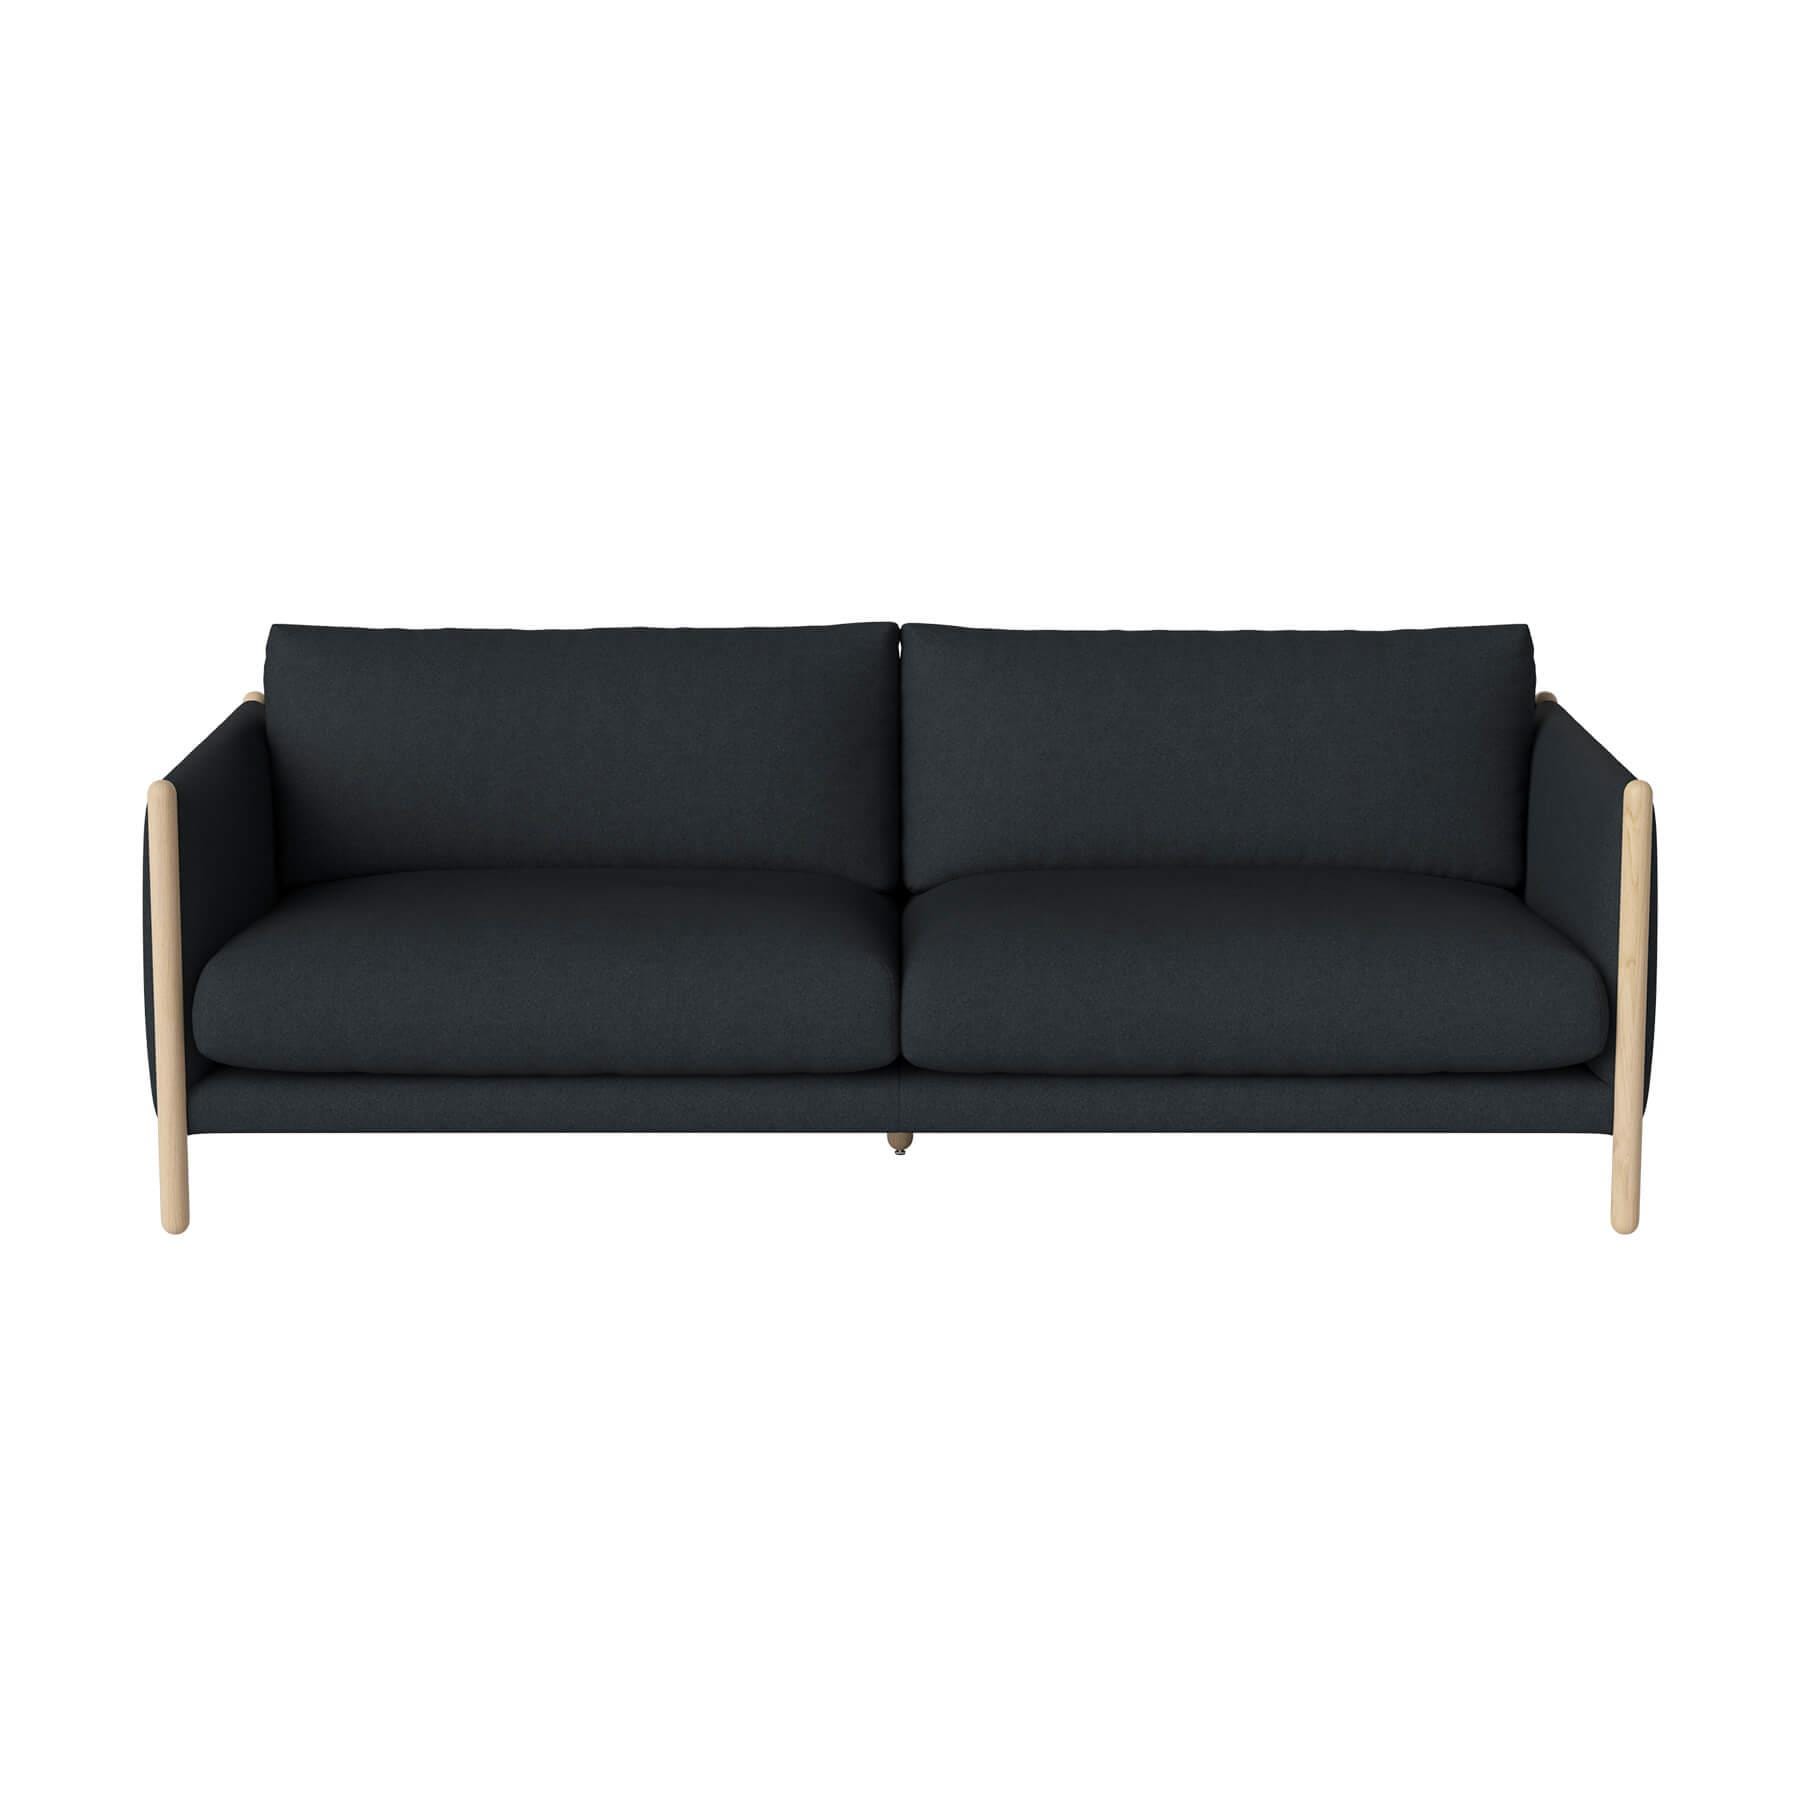 Bolia Hayden Sofa 25 Seater Sofa White Oiled Oak Qual Navy Blue Designer Furniture From Holloways Of Ludlow